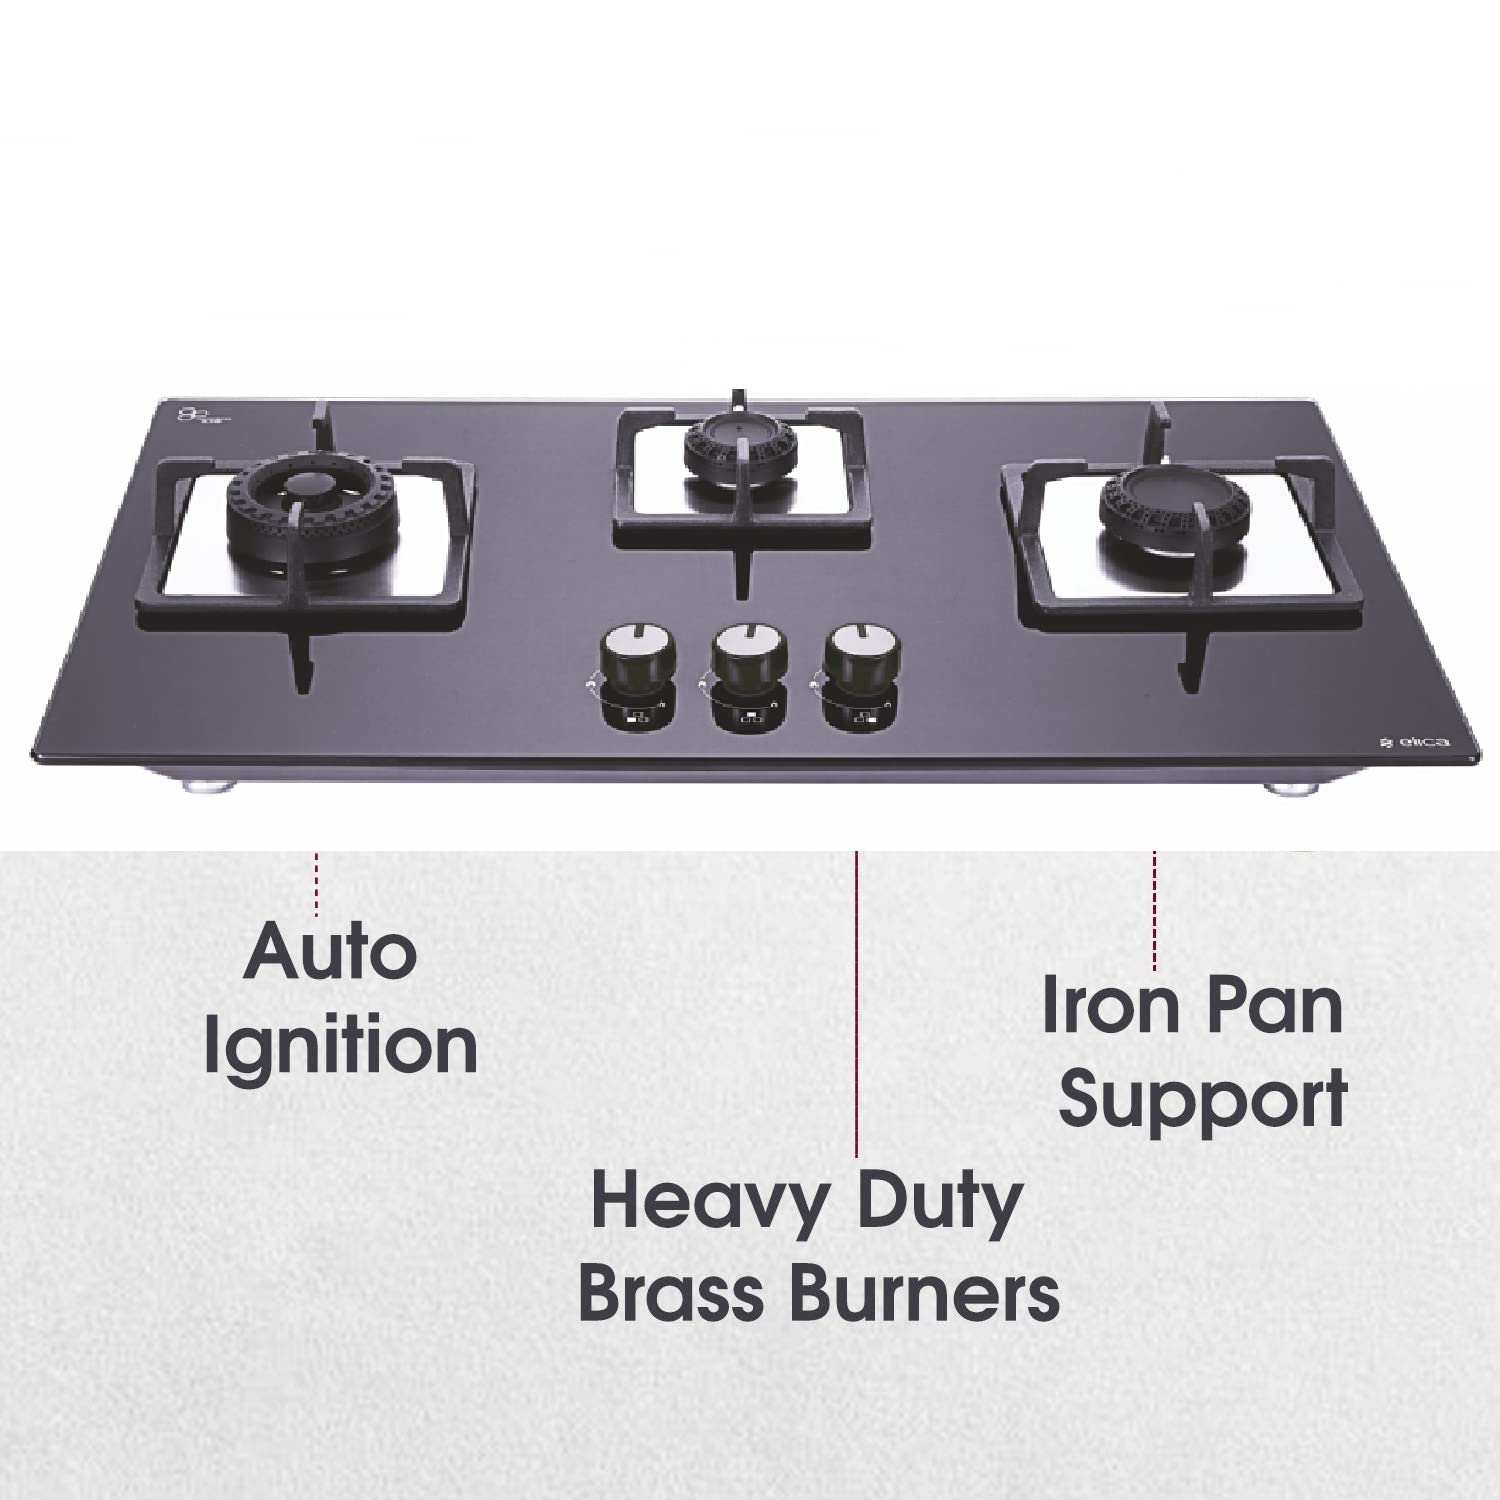 Buy elica FLEXI AB 470 DX DFS 4 Burner Automatic Hob (Battery Operated,  Black) Online - Croma